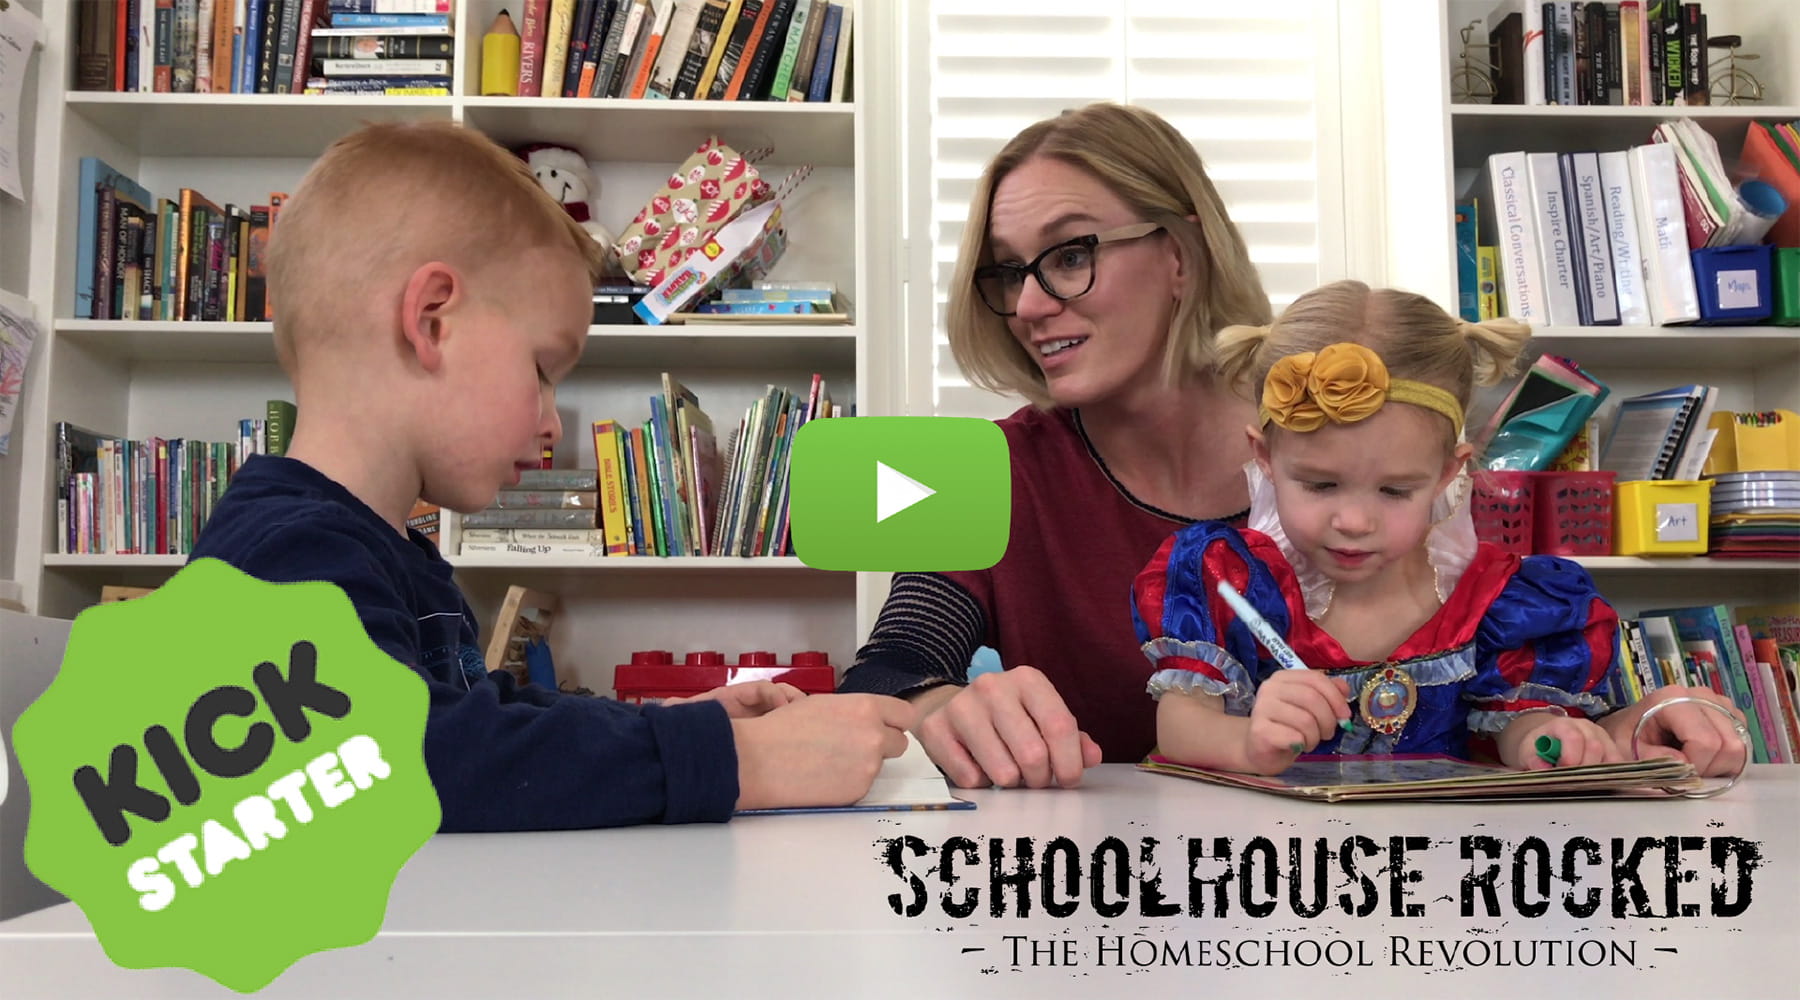 Schoolhouse Rocked homeschool mother with son and daughter